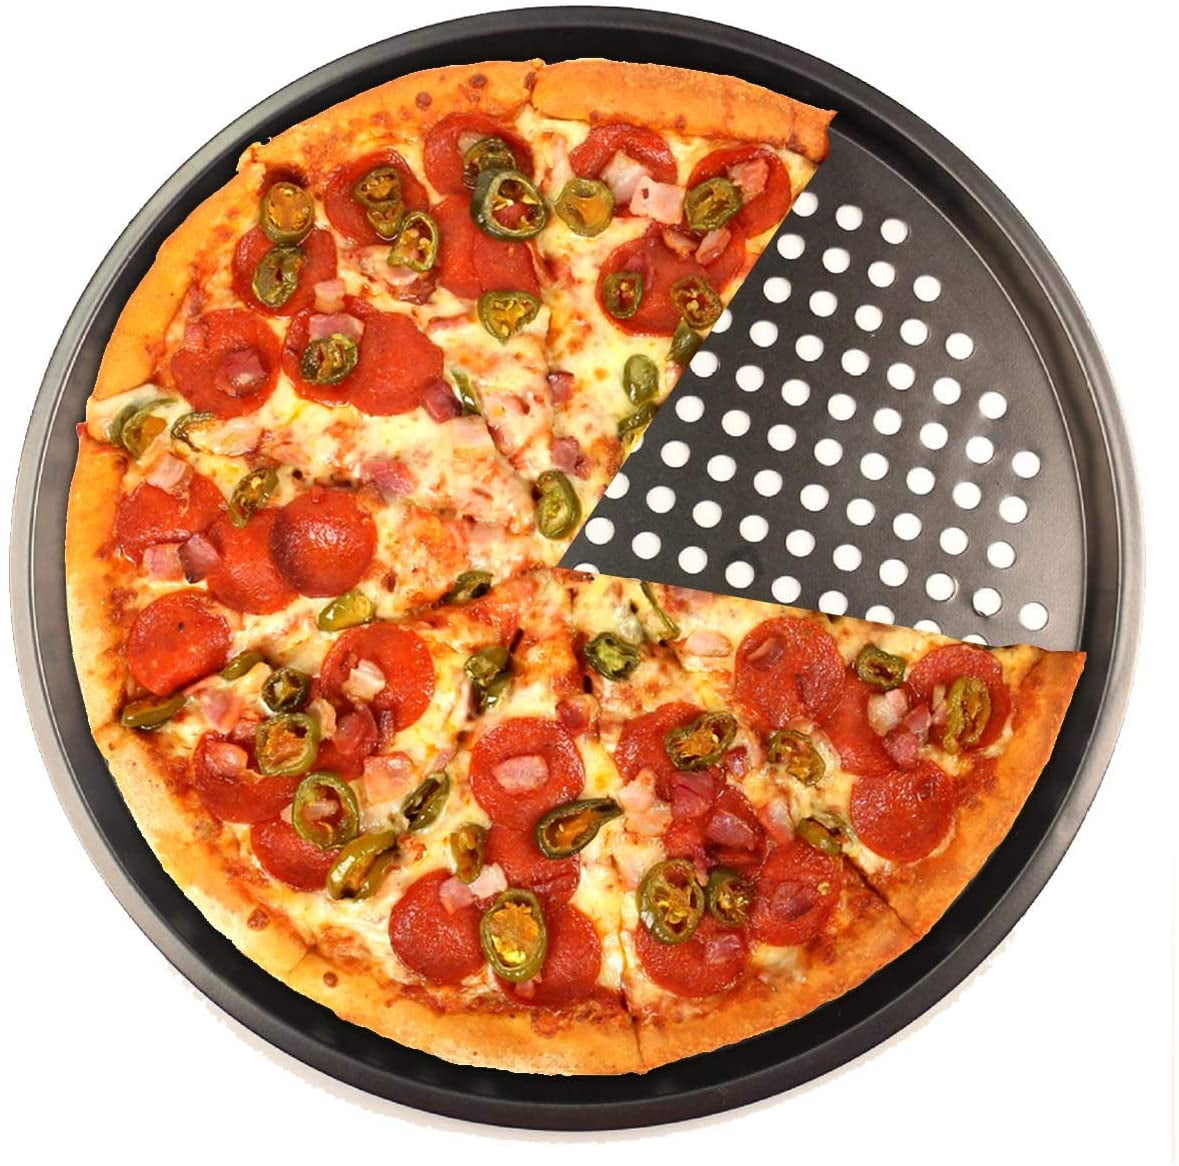 HaWare 12 inch Stainless Steel Pizza Pan Oven Tray, Pizza Baking Tray Set of 2 